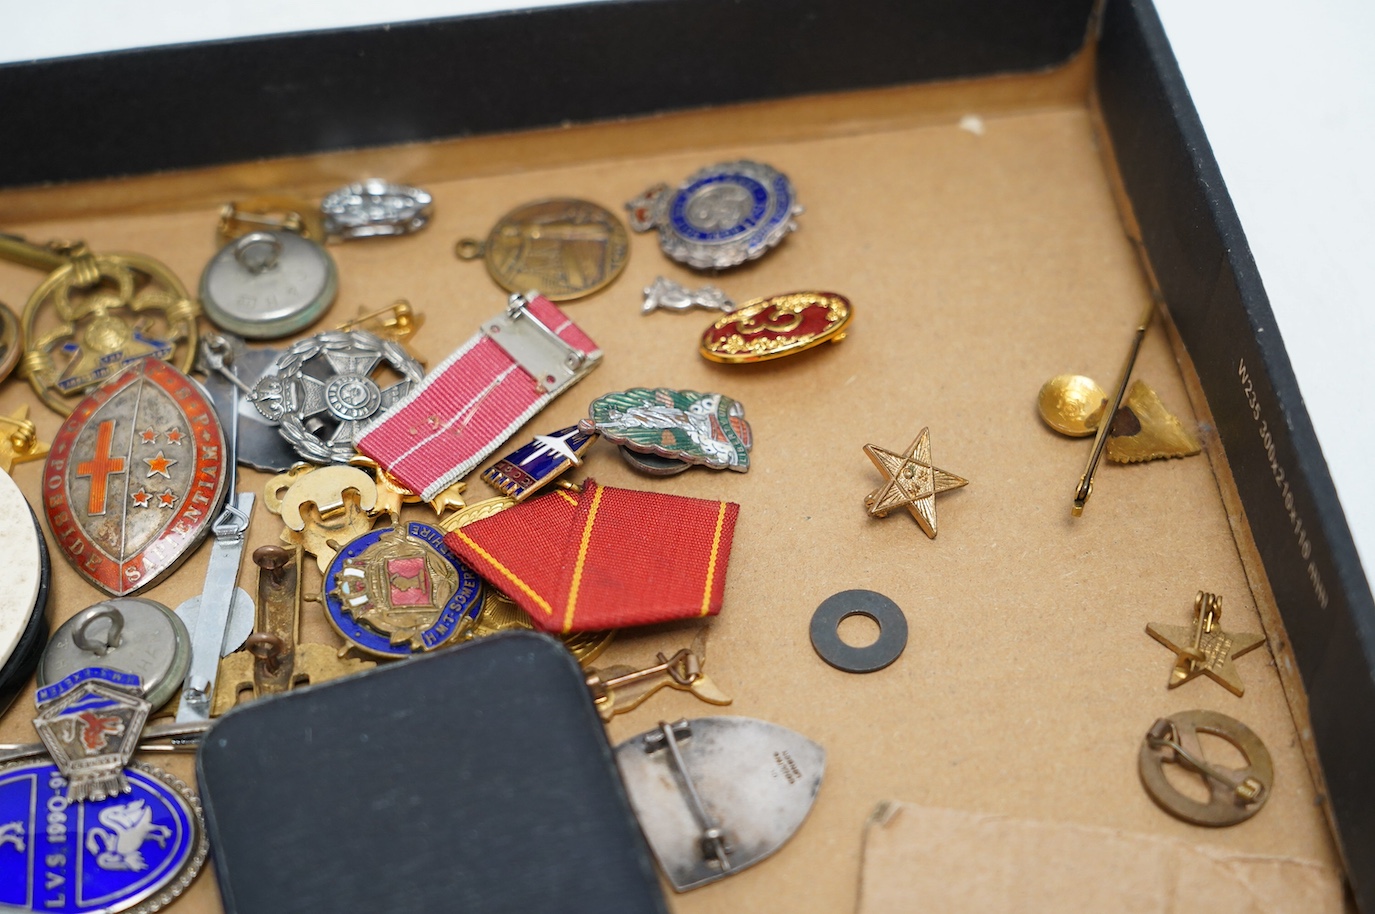 A collection of WWII sweetheart badges, silver badges, military buttons, RAF ephemera, a miniature OBE award, etc. Condition - fair to good